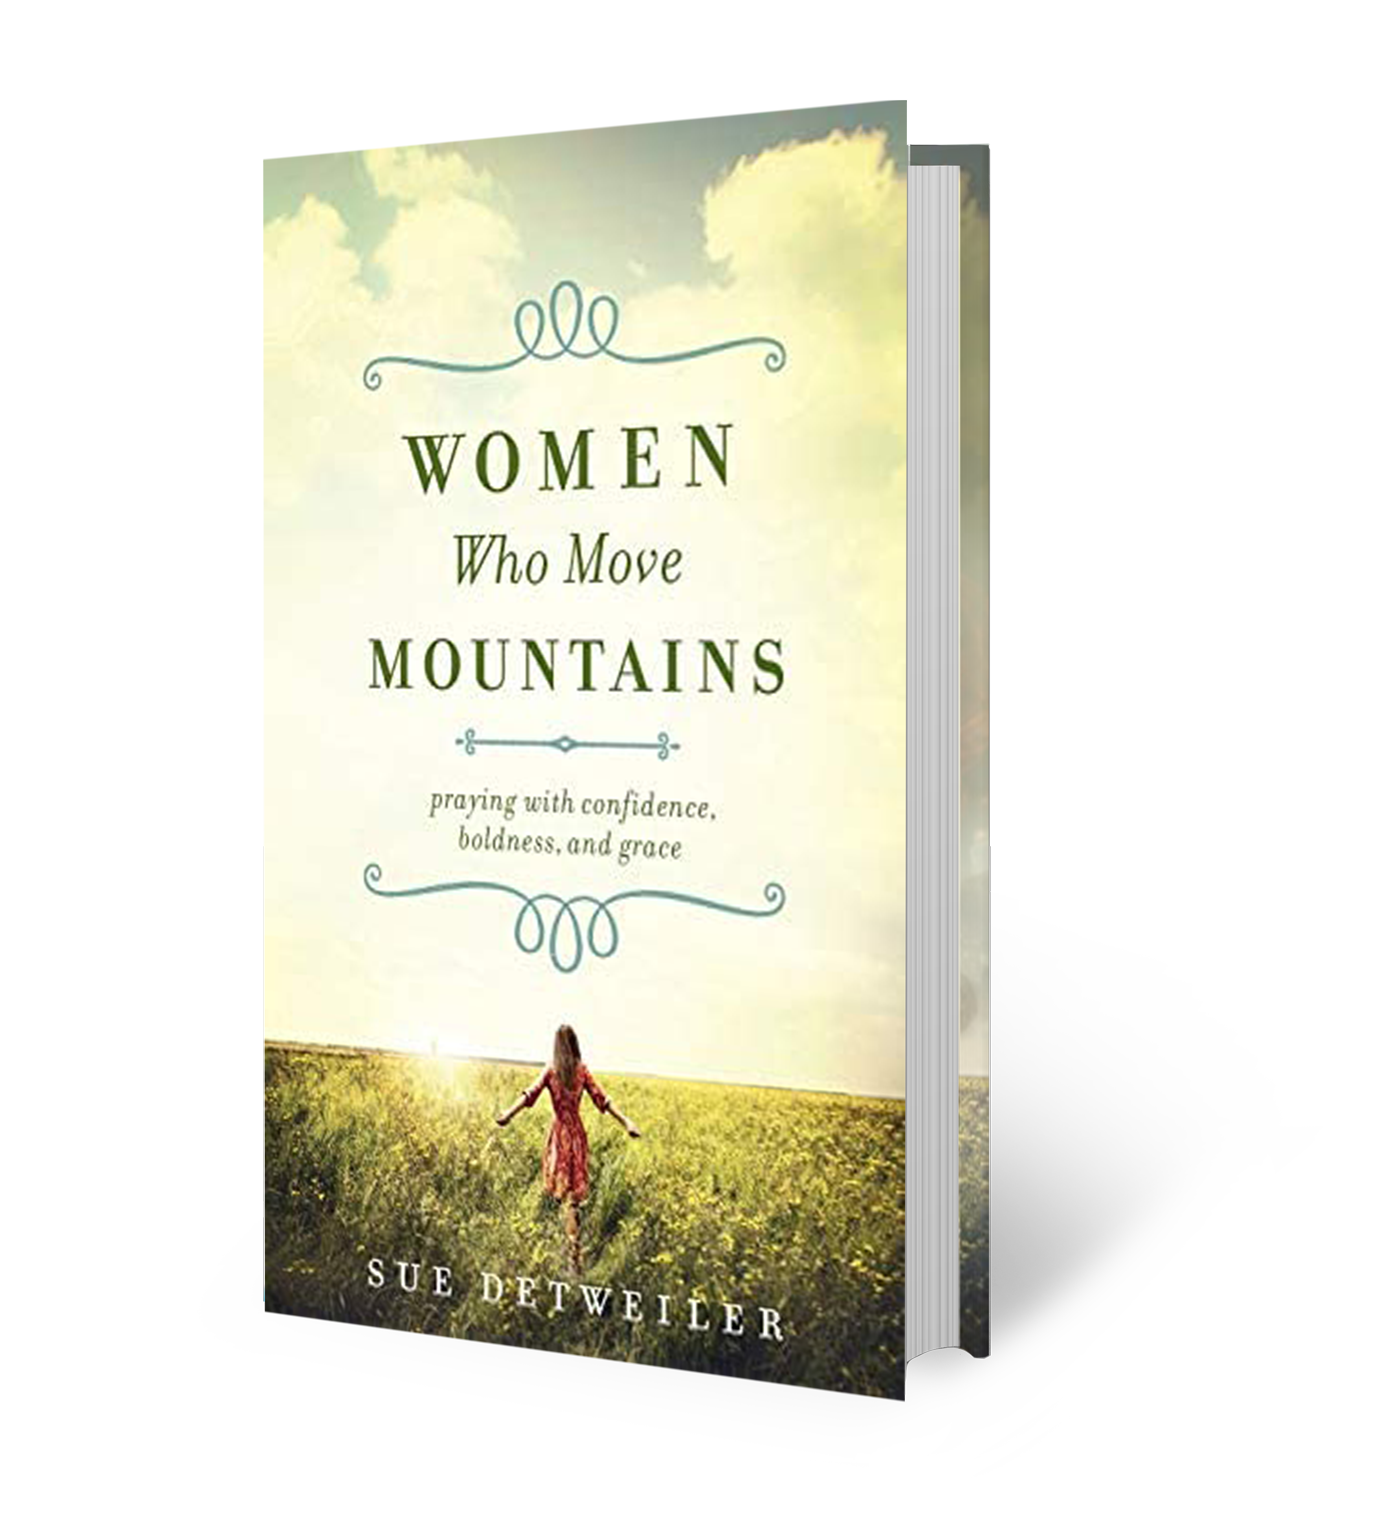 Women Who Move Mountains by Sue Detweiler